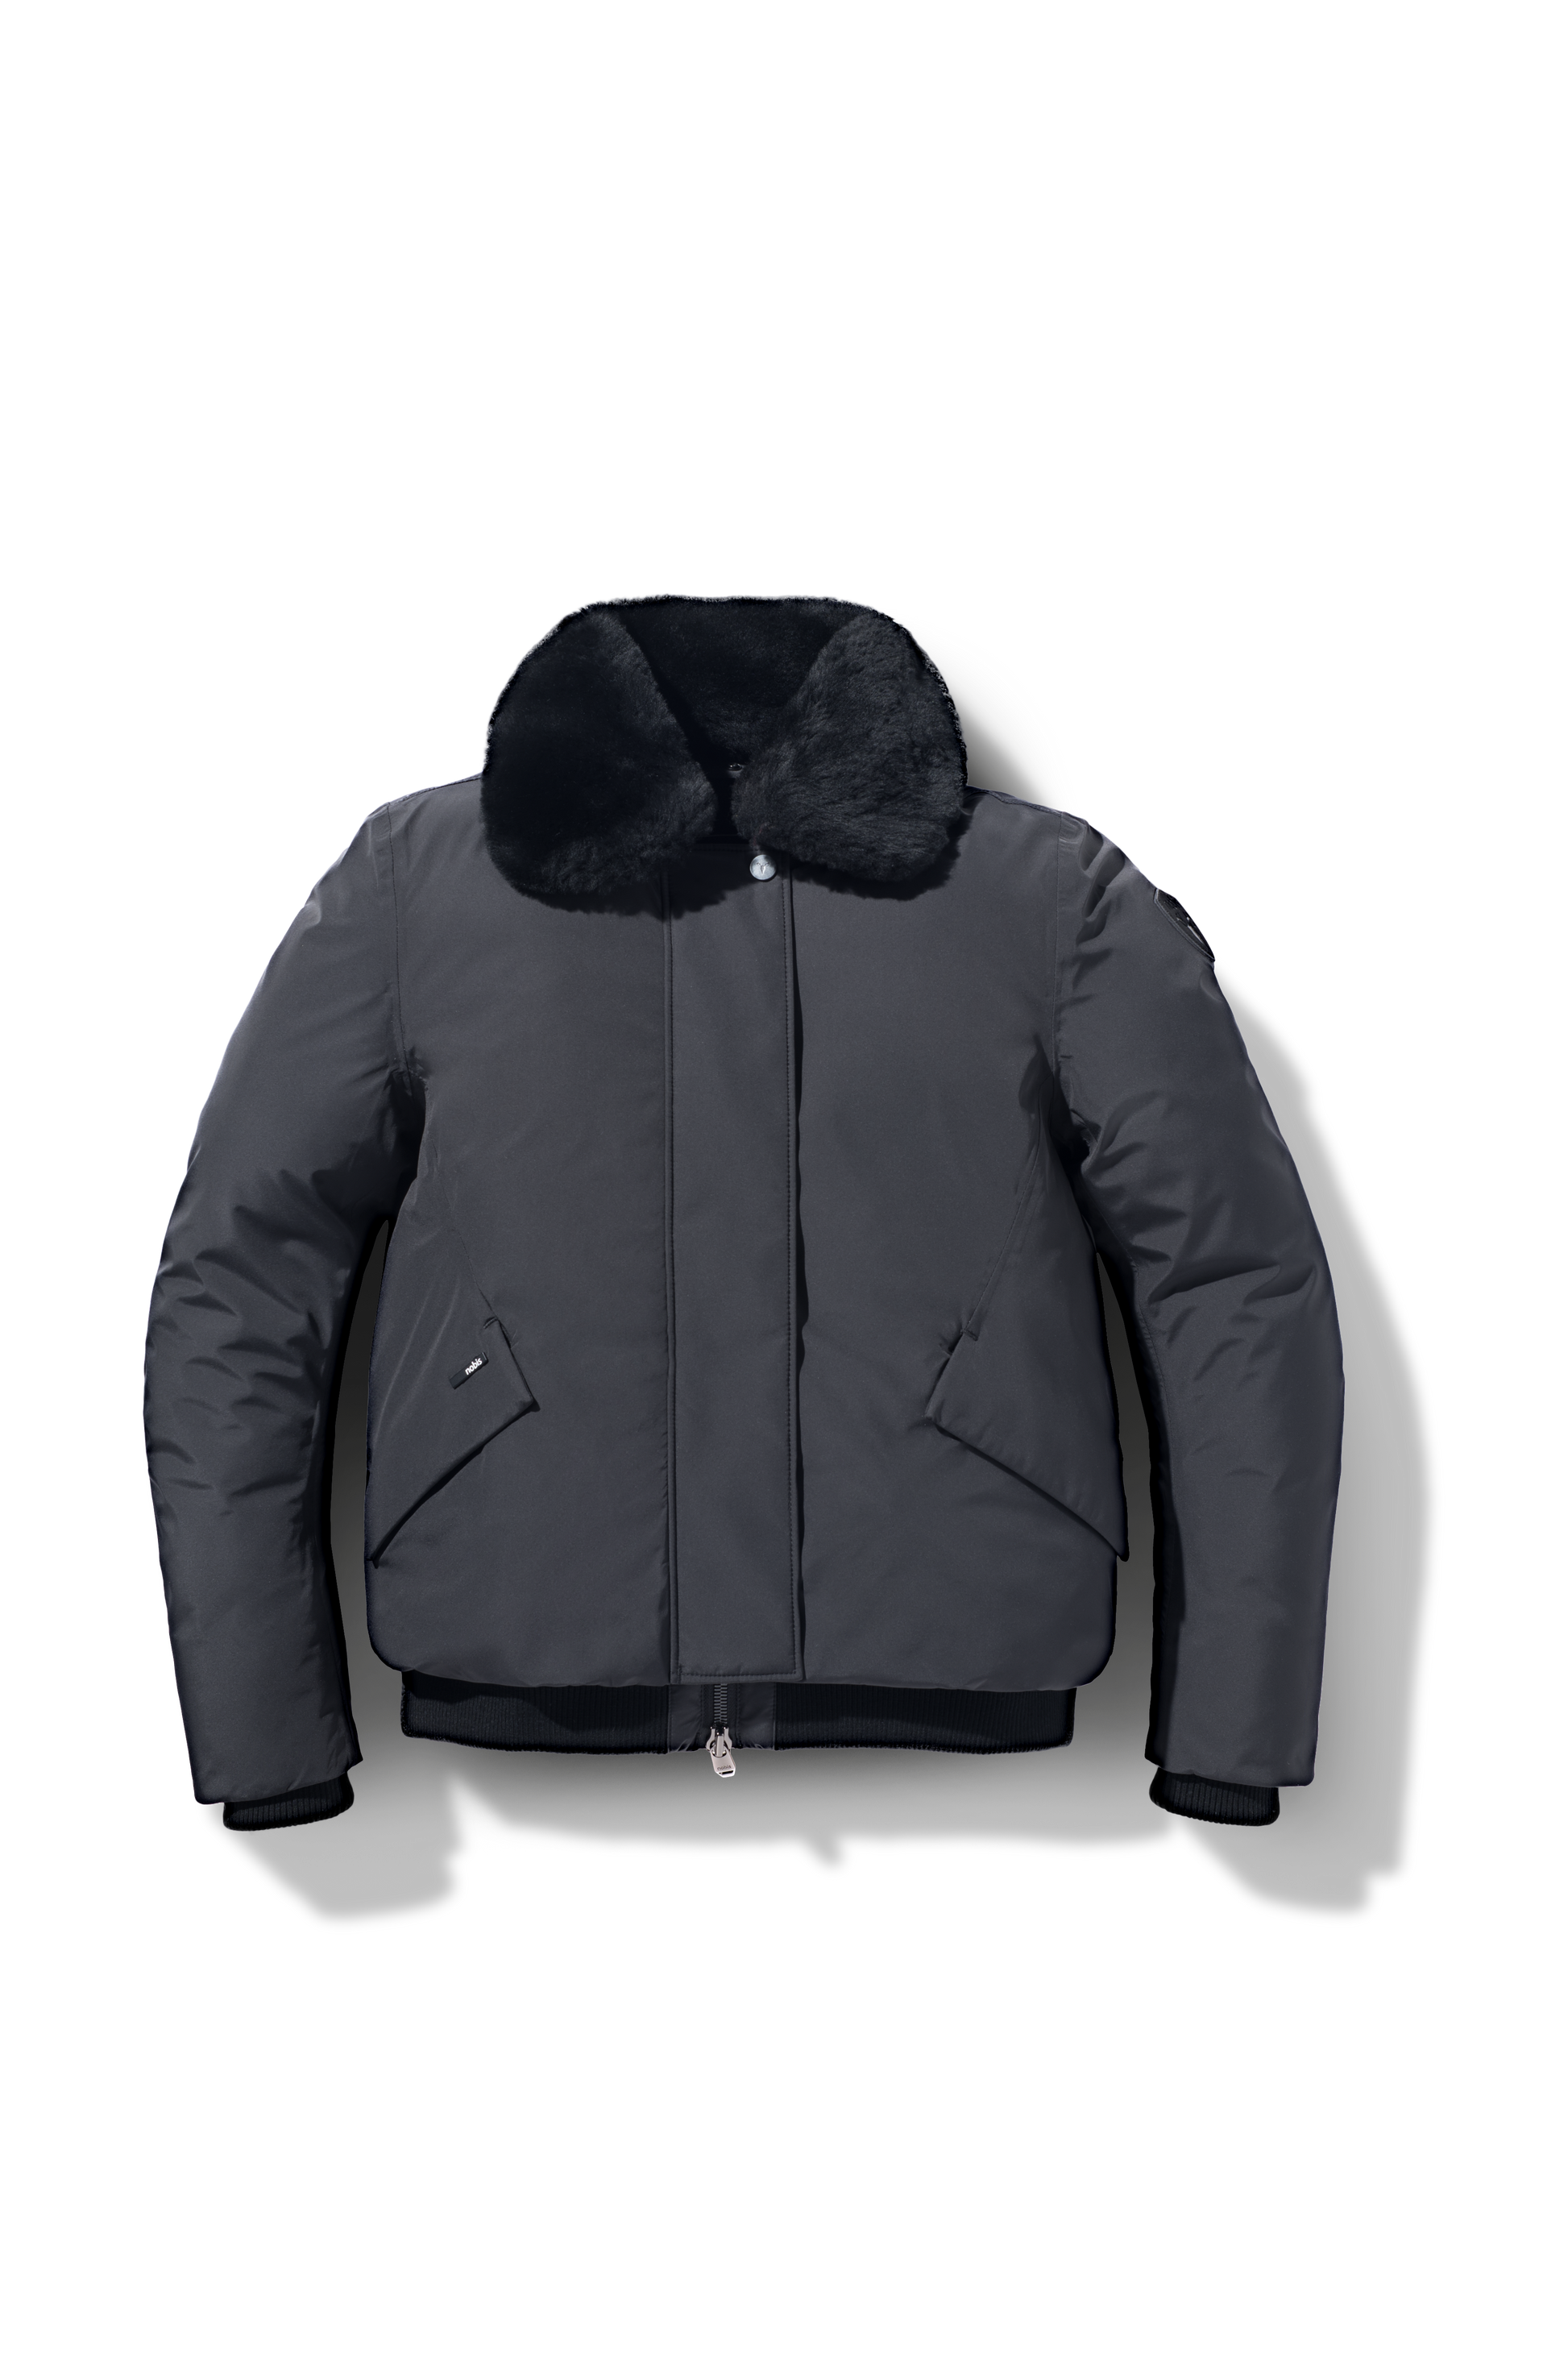 Rae Ladies Aviator Jacket in hip length, Canadian duck down insulation, removable shearling collar with hidden tuckable hood, and two-way front zipper, in Black